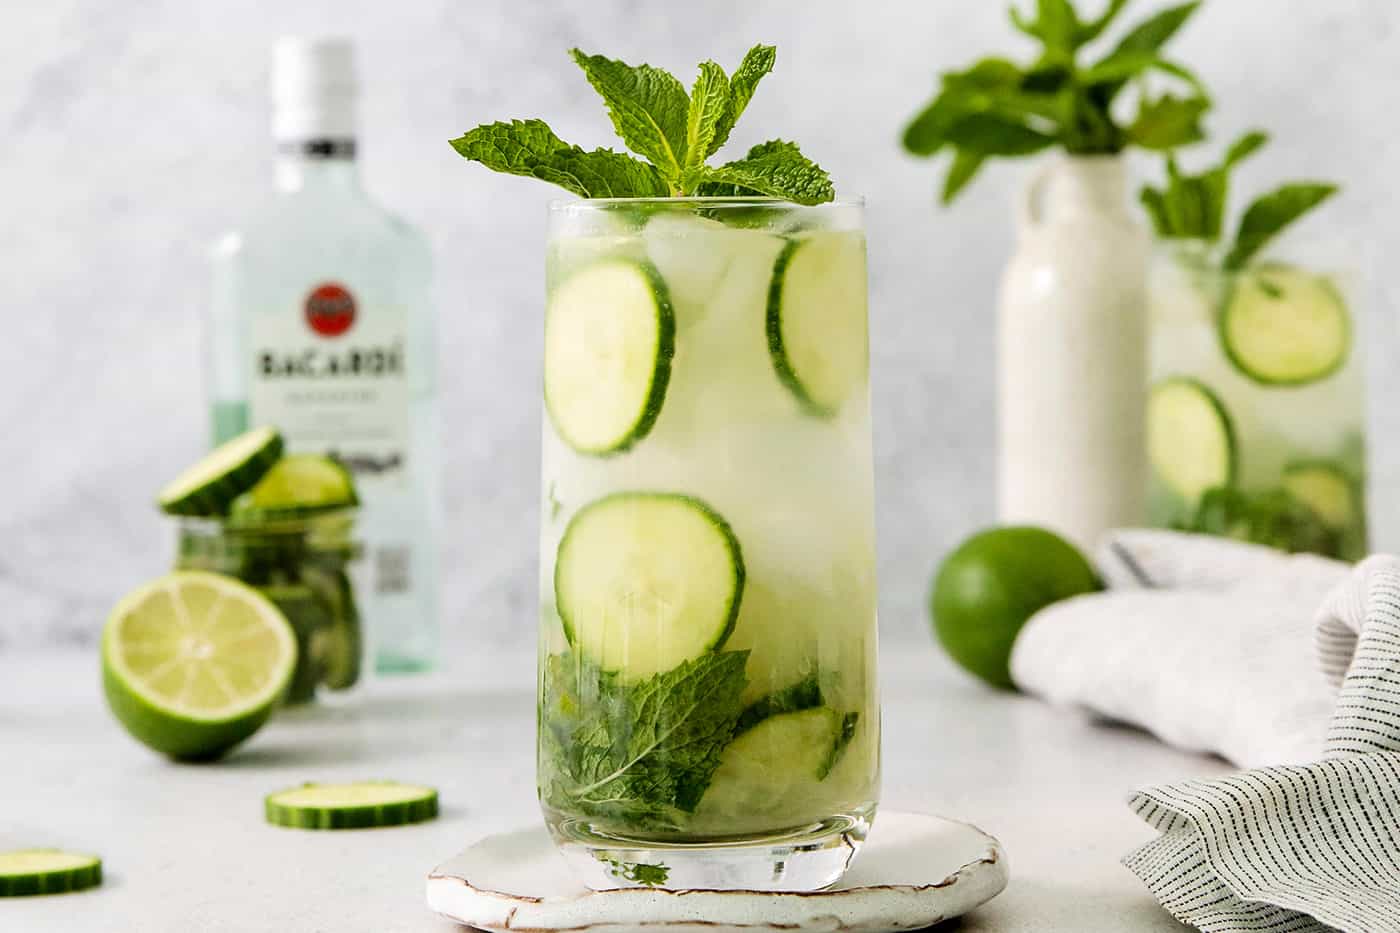 Glasses of cucumber mojito topped with basil are shown with a bottle of rum in the background.